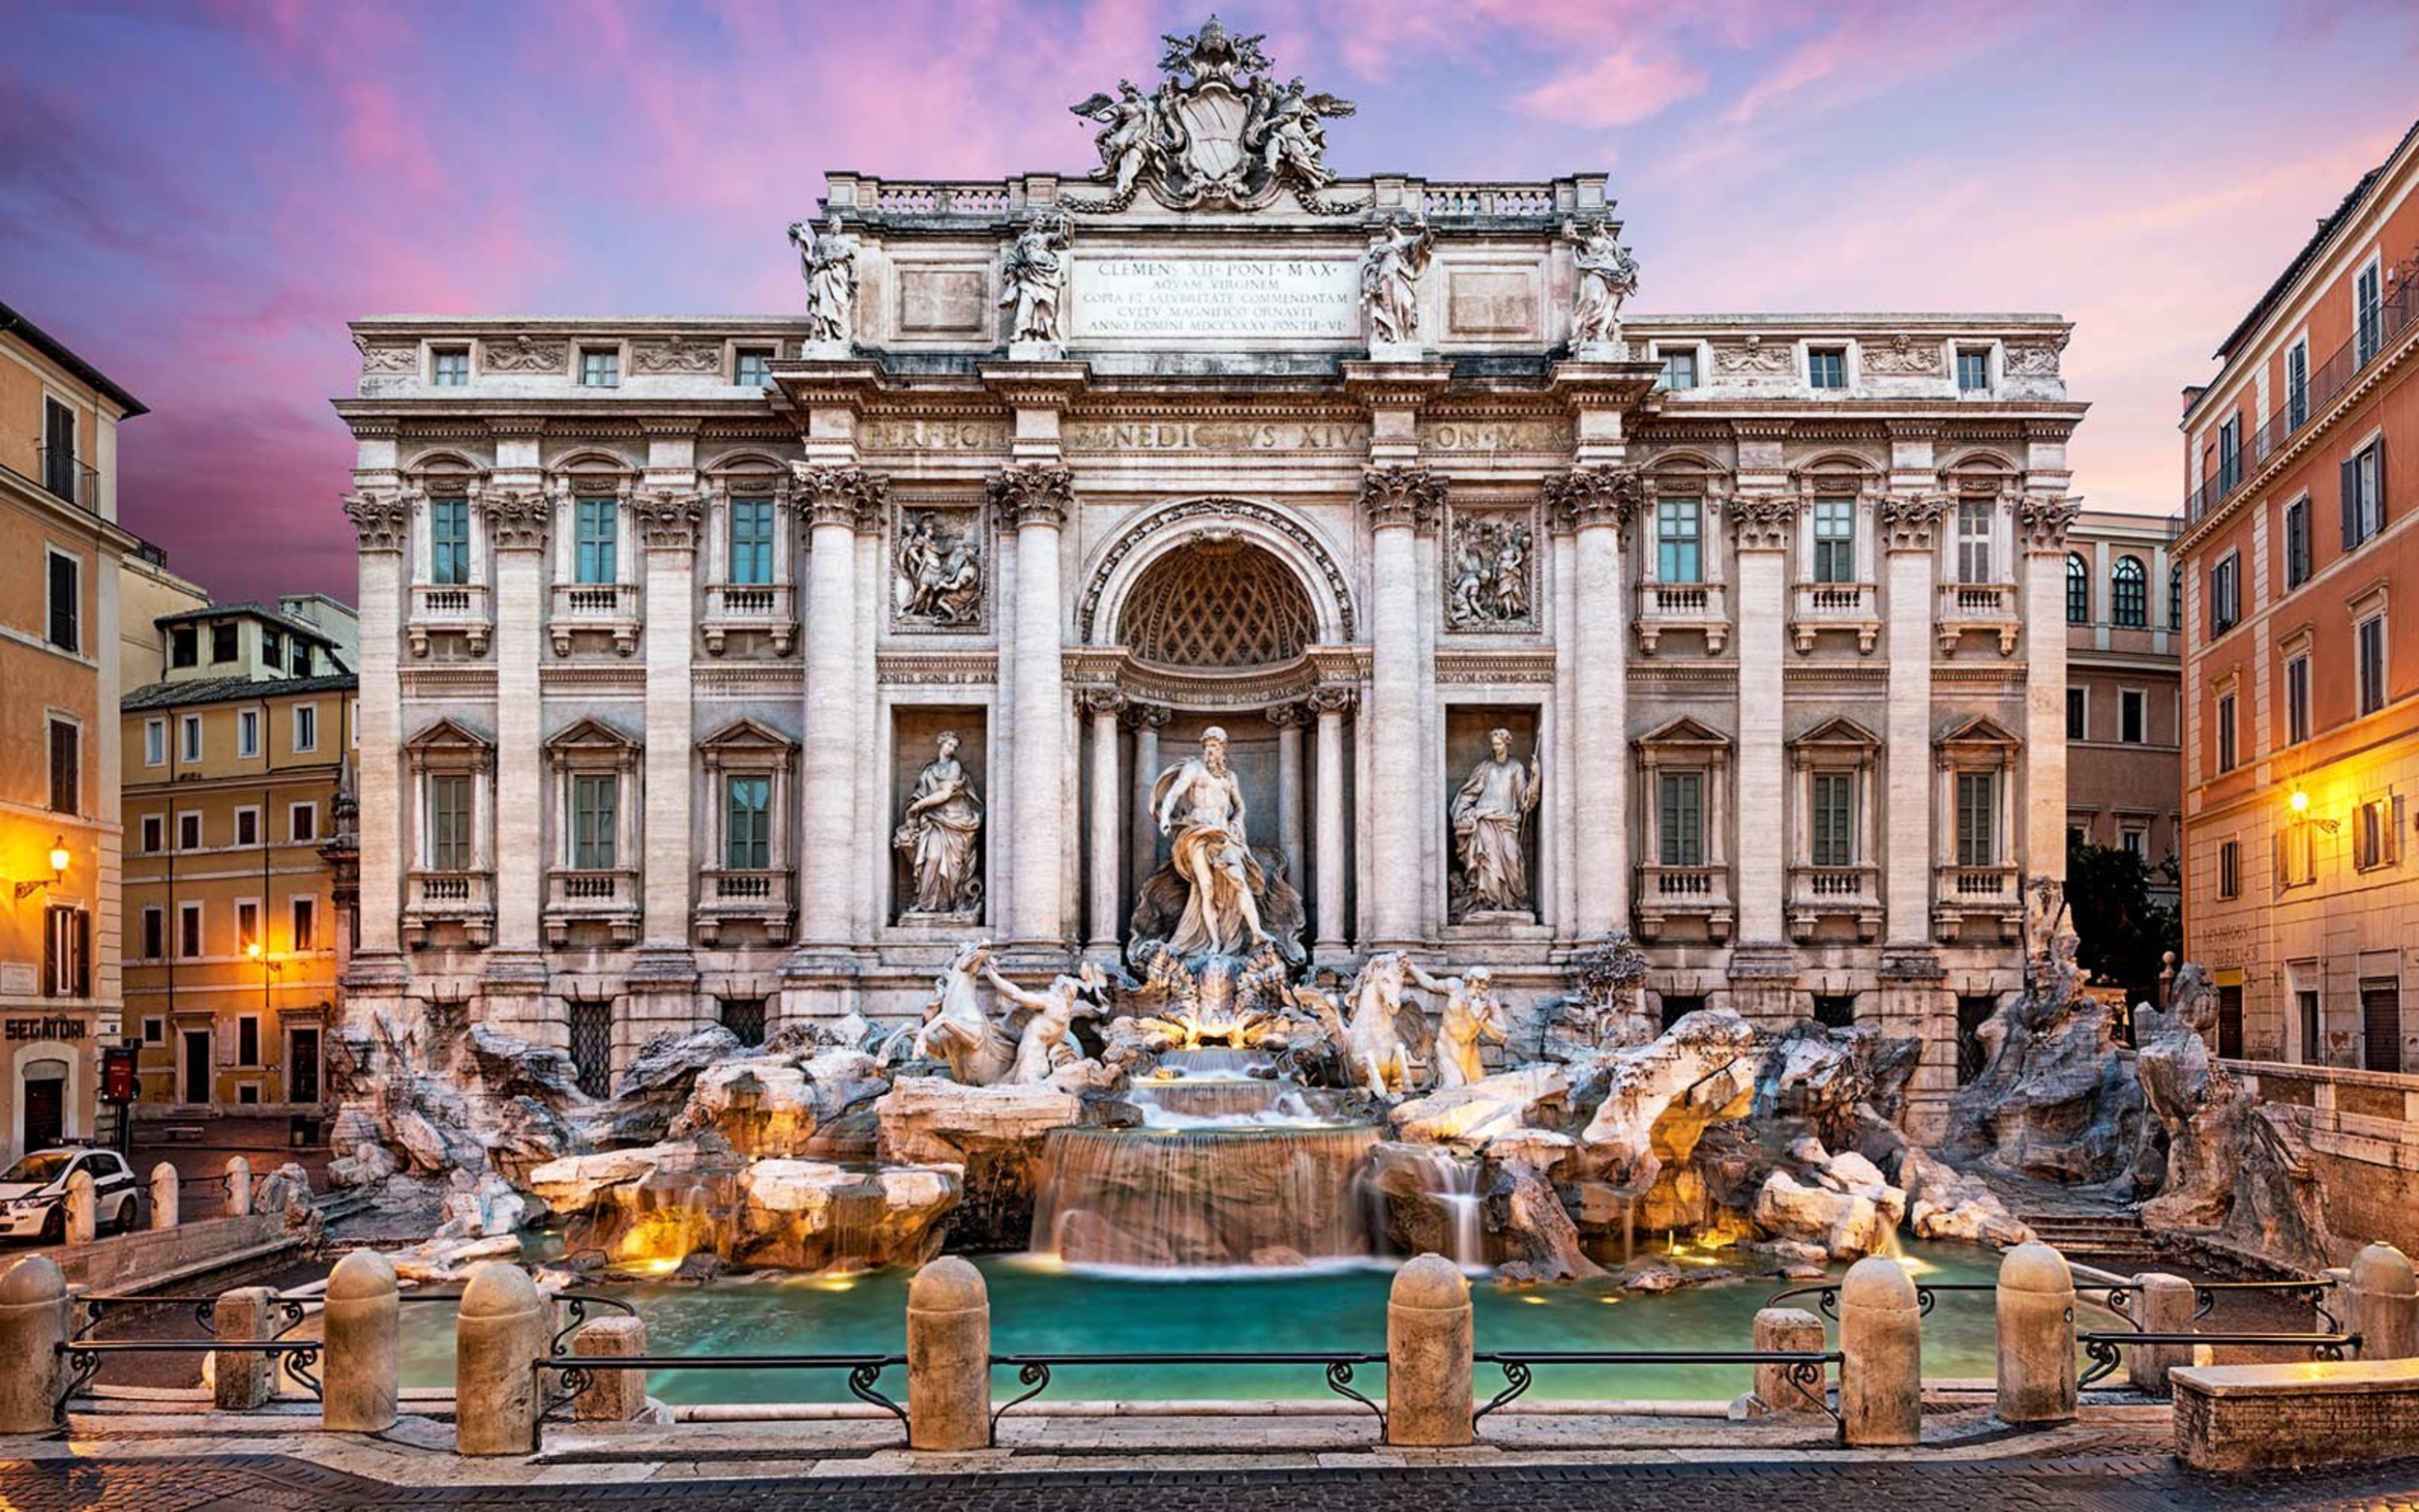 <p>Often referred to as "The Three Street Fountain," the Trevi Fountain is an excellent example of the city's regional art. Located at the intersection of three streets, this fountain draws in visitors from all sides of Rome. Its statues are a lineup of masterpieces from Nicola Salvi, but the real reason everyone is here is because of Federico Fellini, who shot the famous scene of Marcello Mastroianni and Anita Ekberg lapping in the pool at midnight. </p><p>You may also like: <a href='https://www.yardbarker.com/lifestyle/articles/10_candies_that_are_treats_and_10_that_are_tricks_102323/s1__37990878'>10 candies that are treats and 10 that are tricks</a></p>